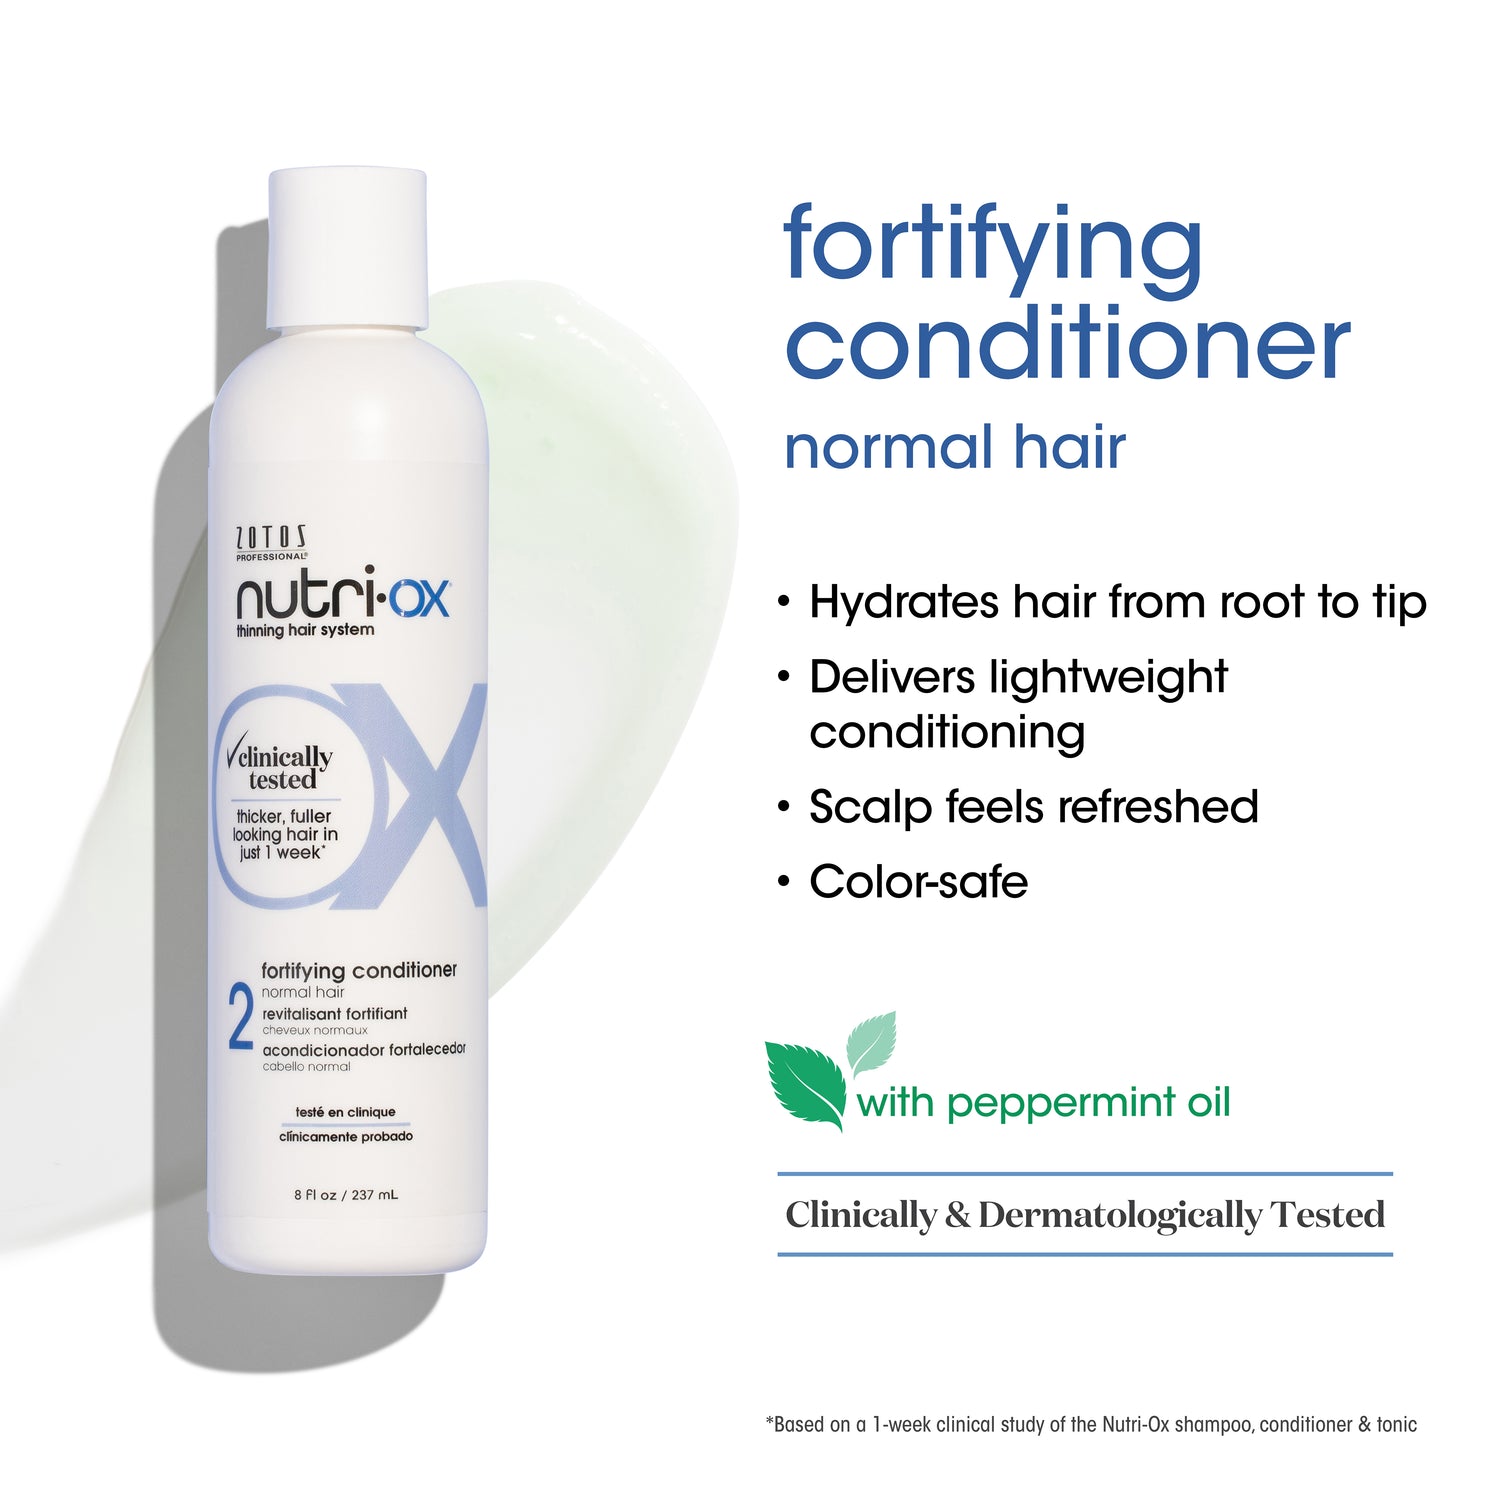 Fortifying conditioner for normal hair. It hydrates hair from root to tip, delivers lightweight conditioning, scalp feels refreshed, color-safe.